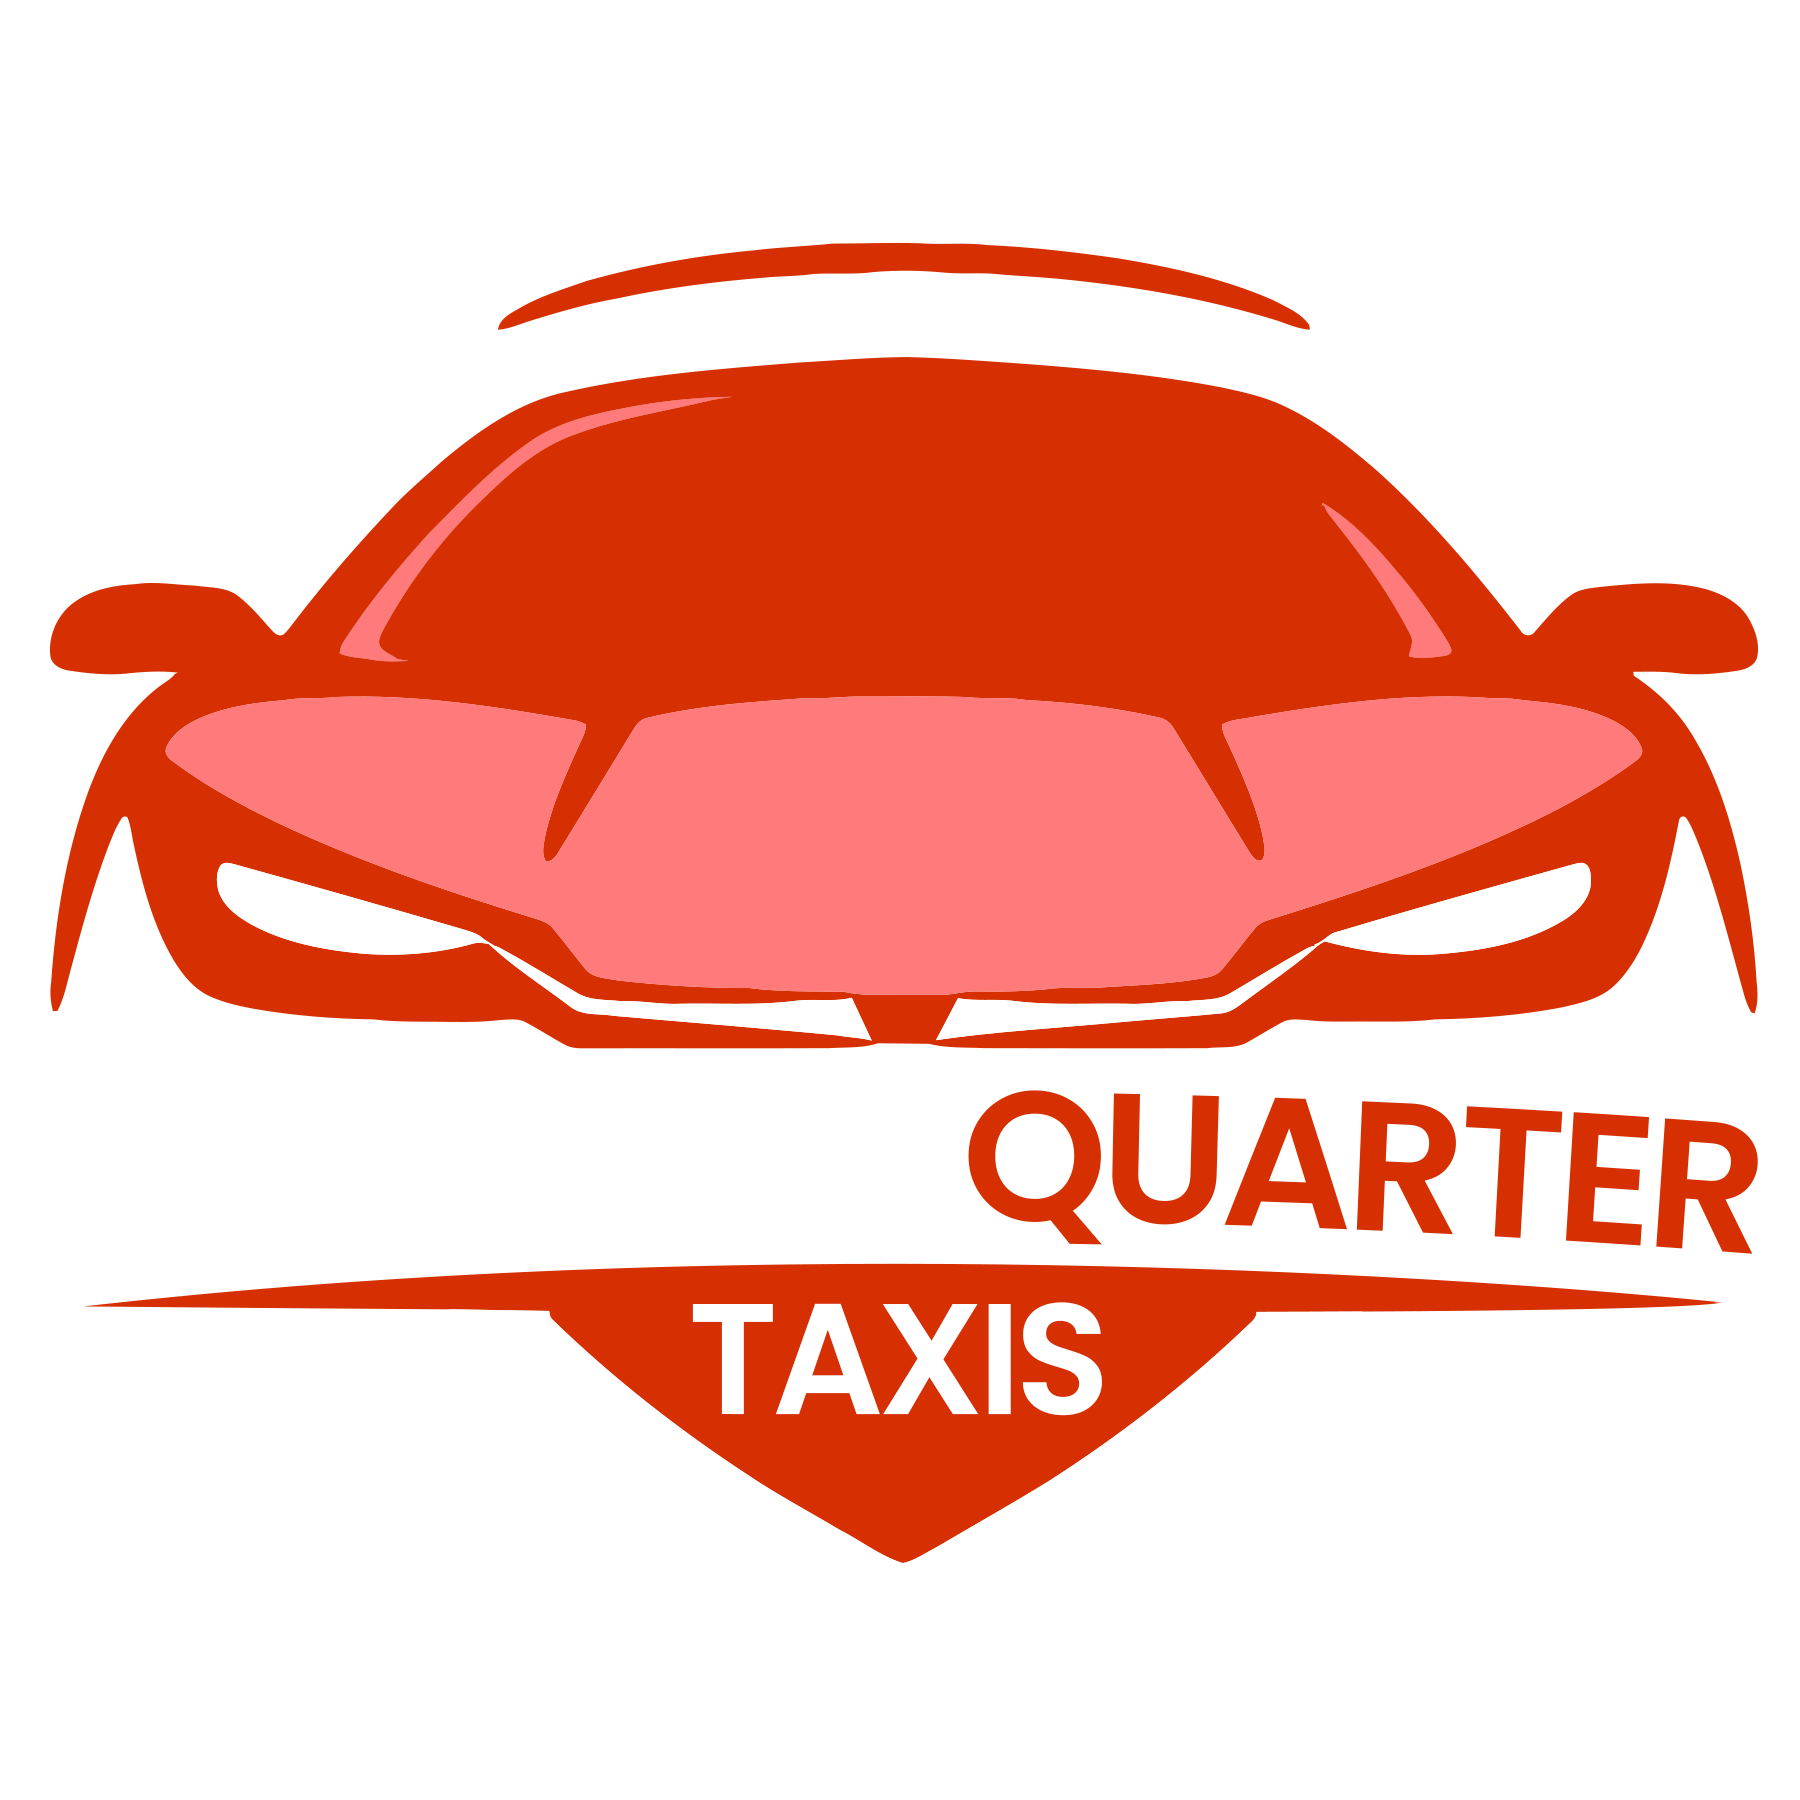 24 Hours Car Services in Jewellery Quarter